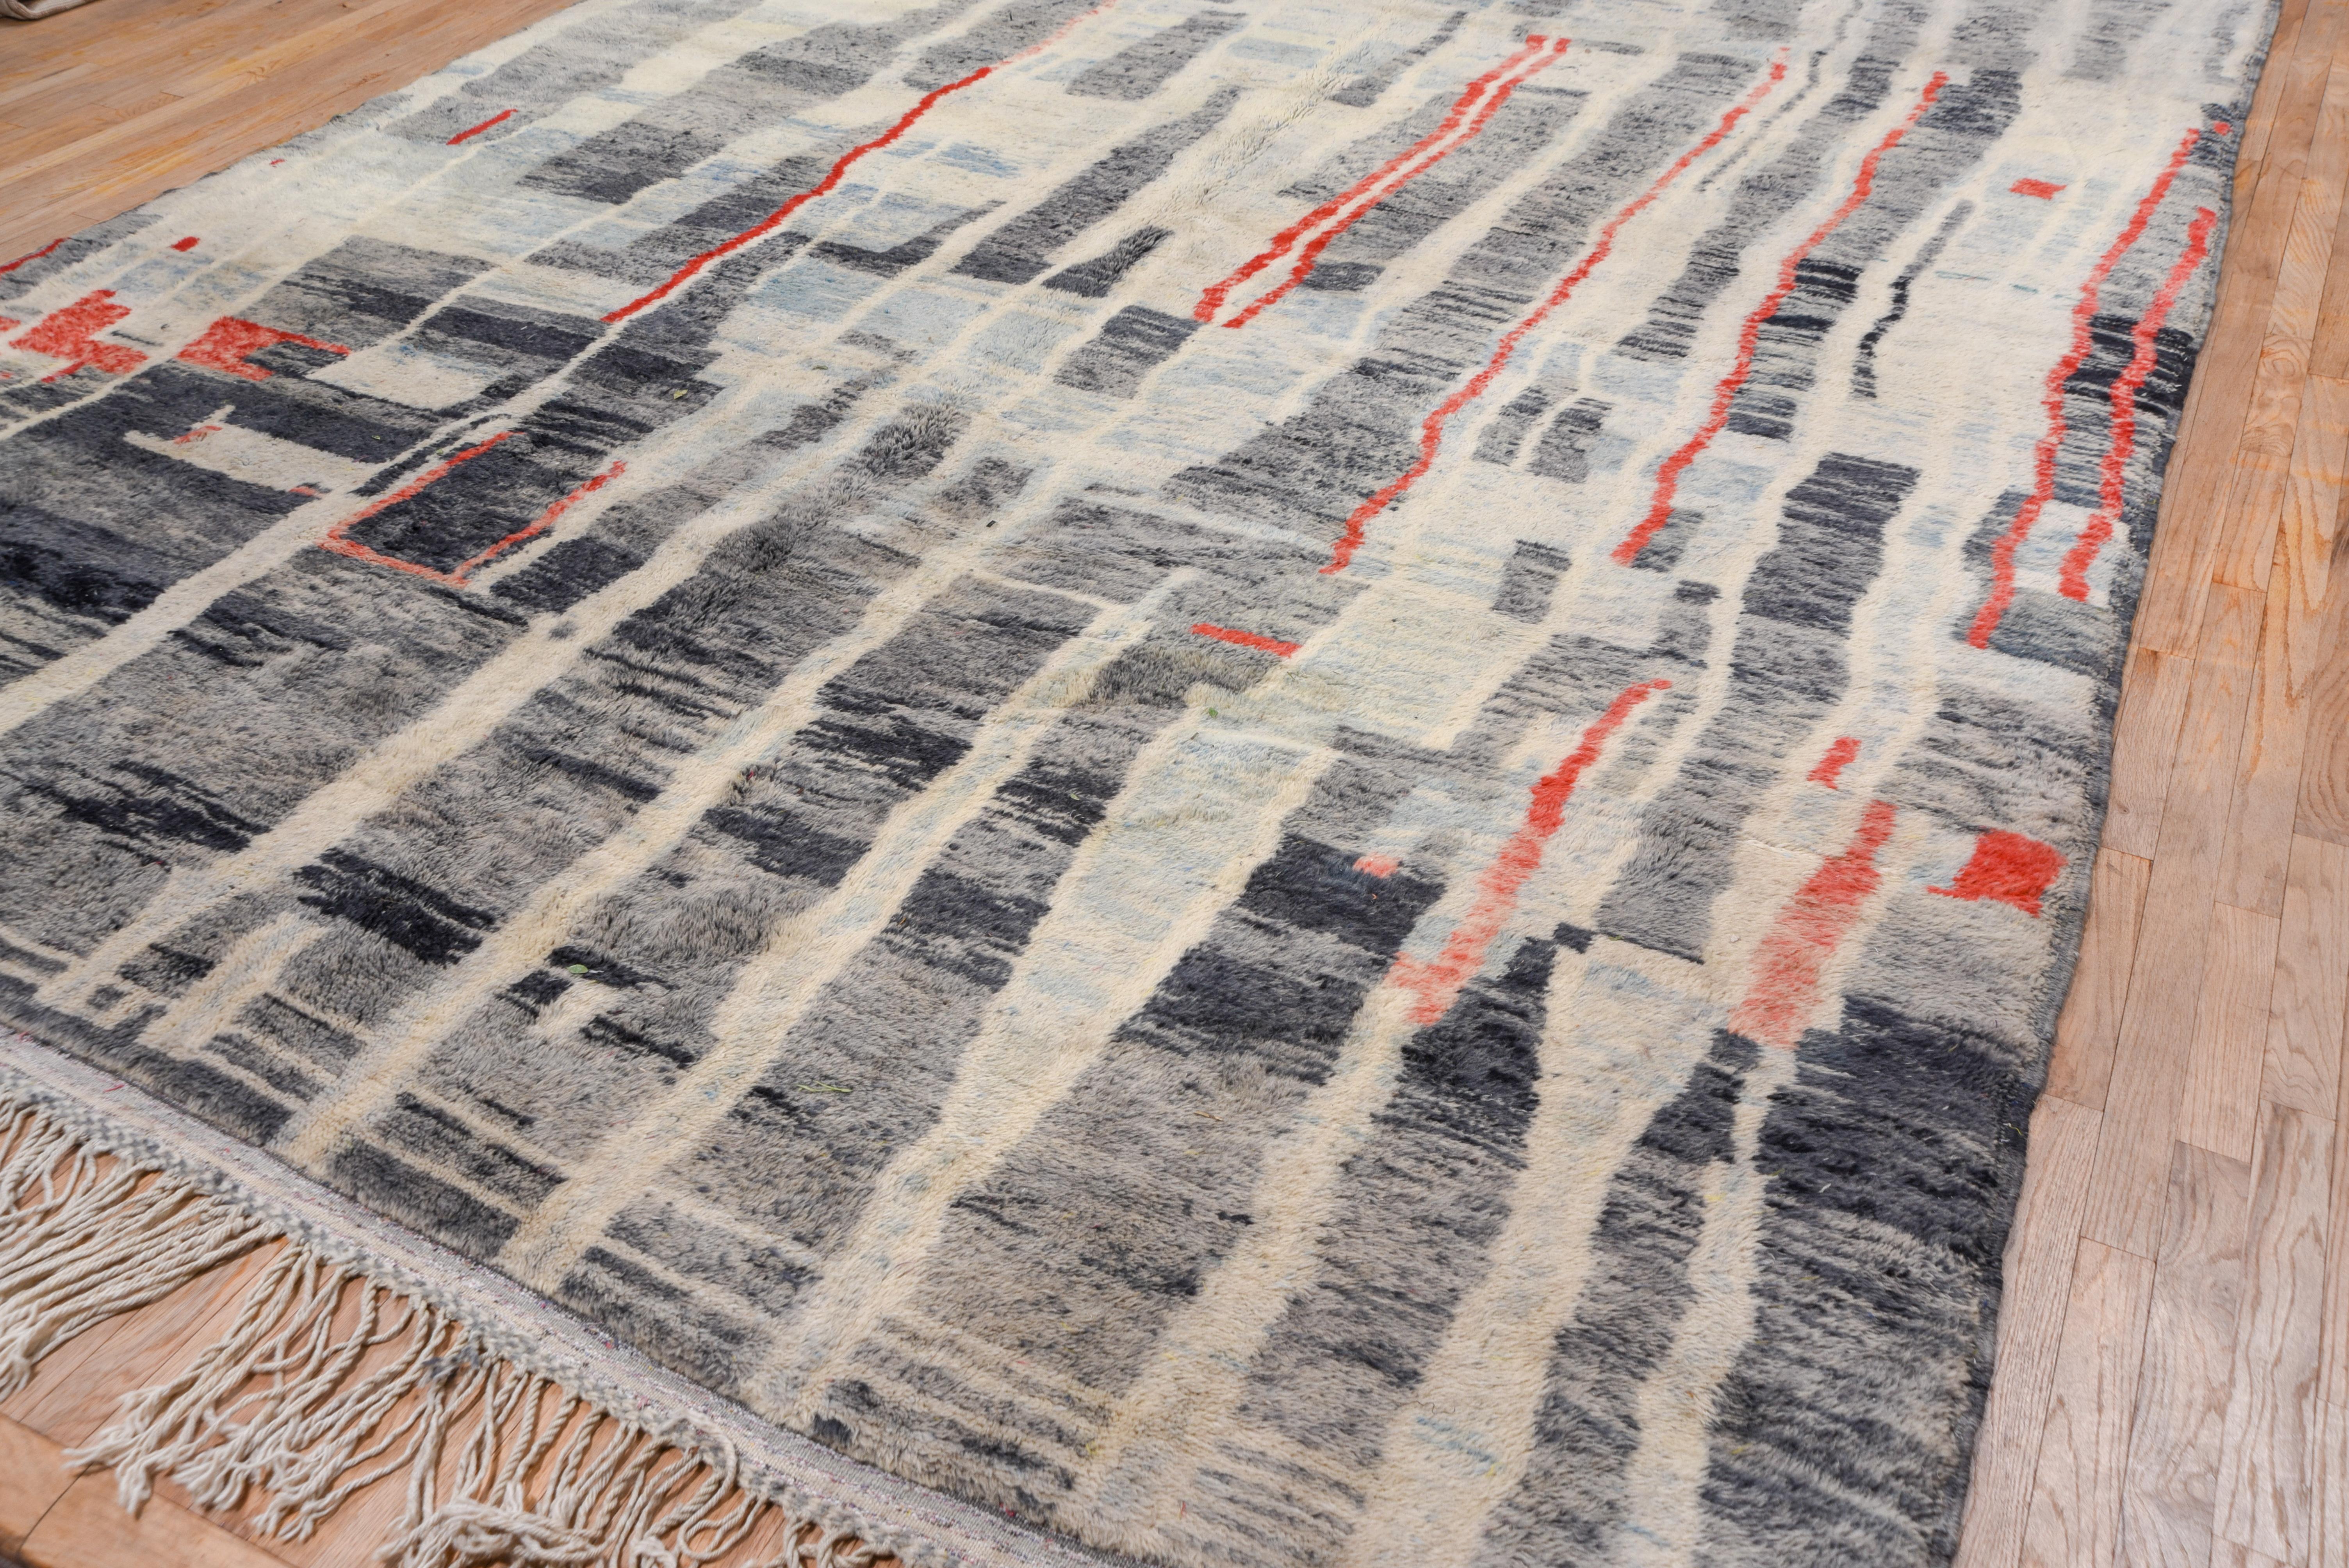 Borderless, with pale blue, ivory and rust broken stripes dissecting the impossibly abrashed slate blue ground. Thick pile, abstract and contemporary. Make a statement with this gorgeous colorful Moroccan carpet!